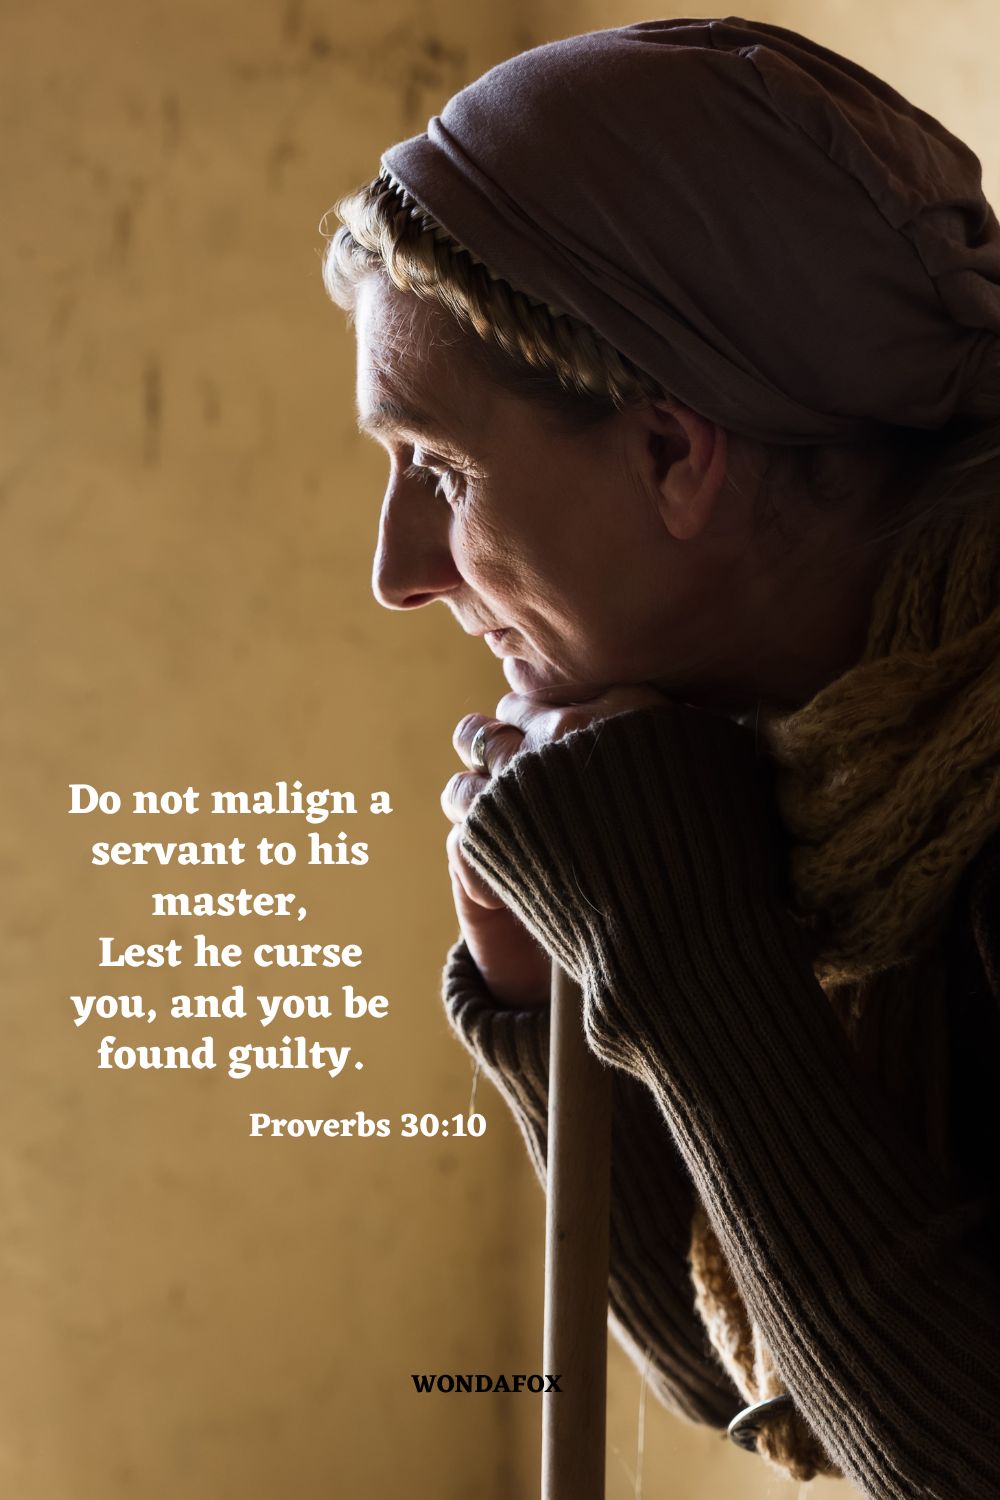 Do not malign a servant to his master, Lest he curse you, and you be found guilty.
Proverbs 30:10